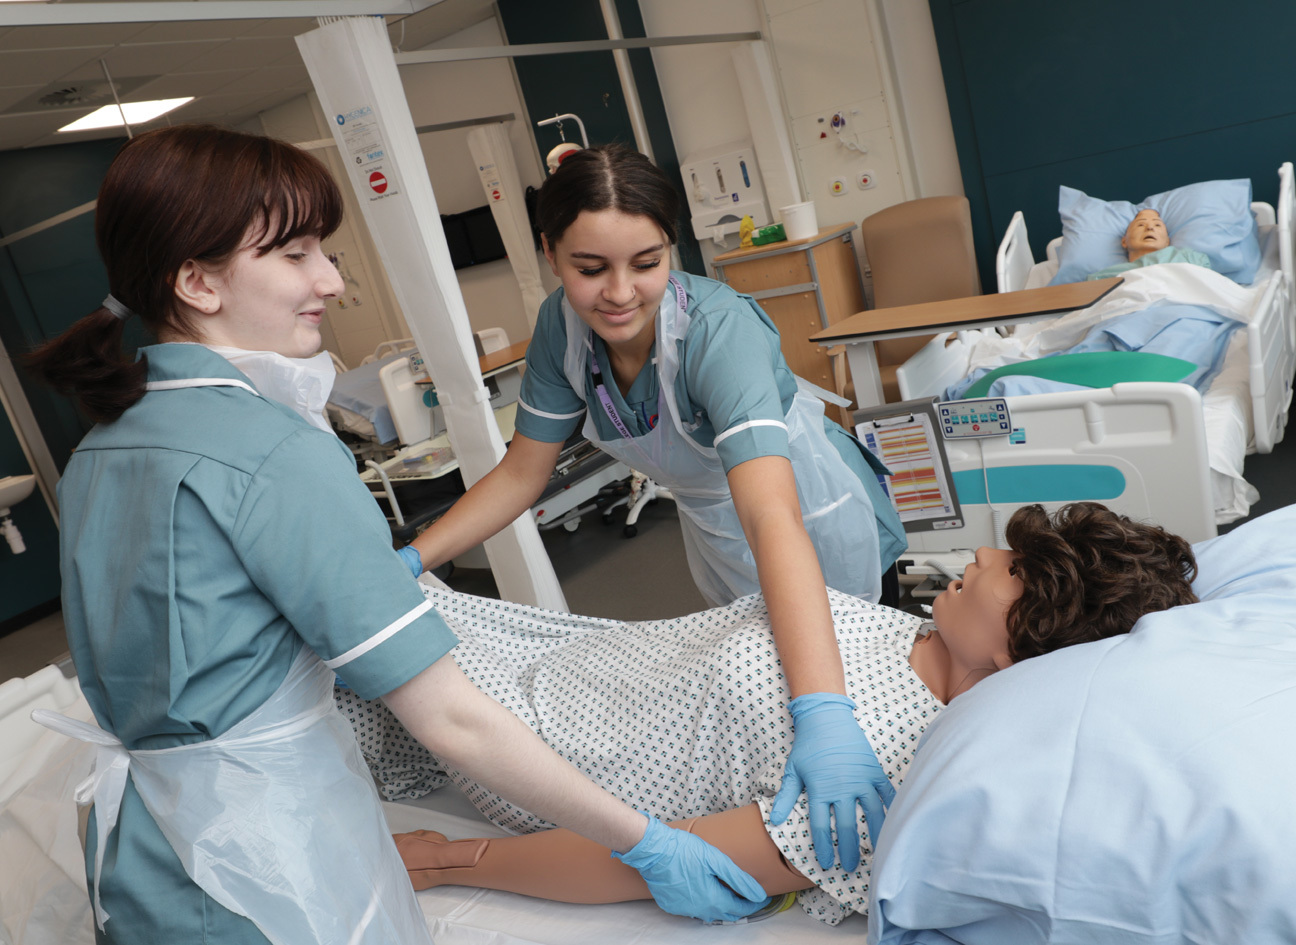 Healthcare students working in the mock ward